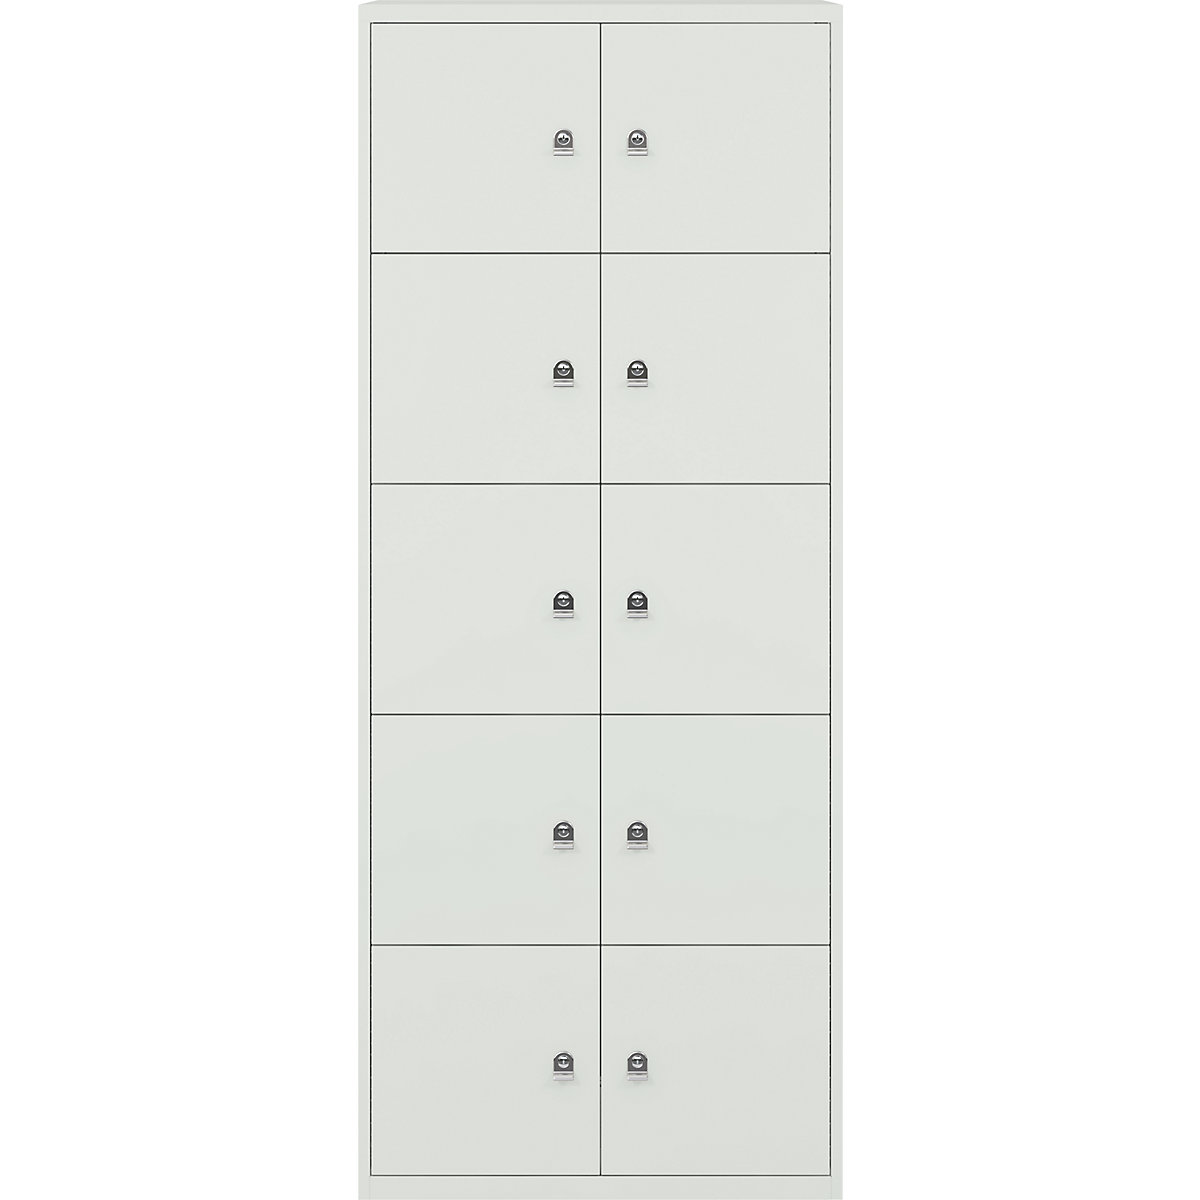 BISLEY – LateralFile™ lodge, with 10 lockable compartments, height 375 mm each, portland